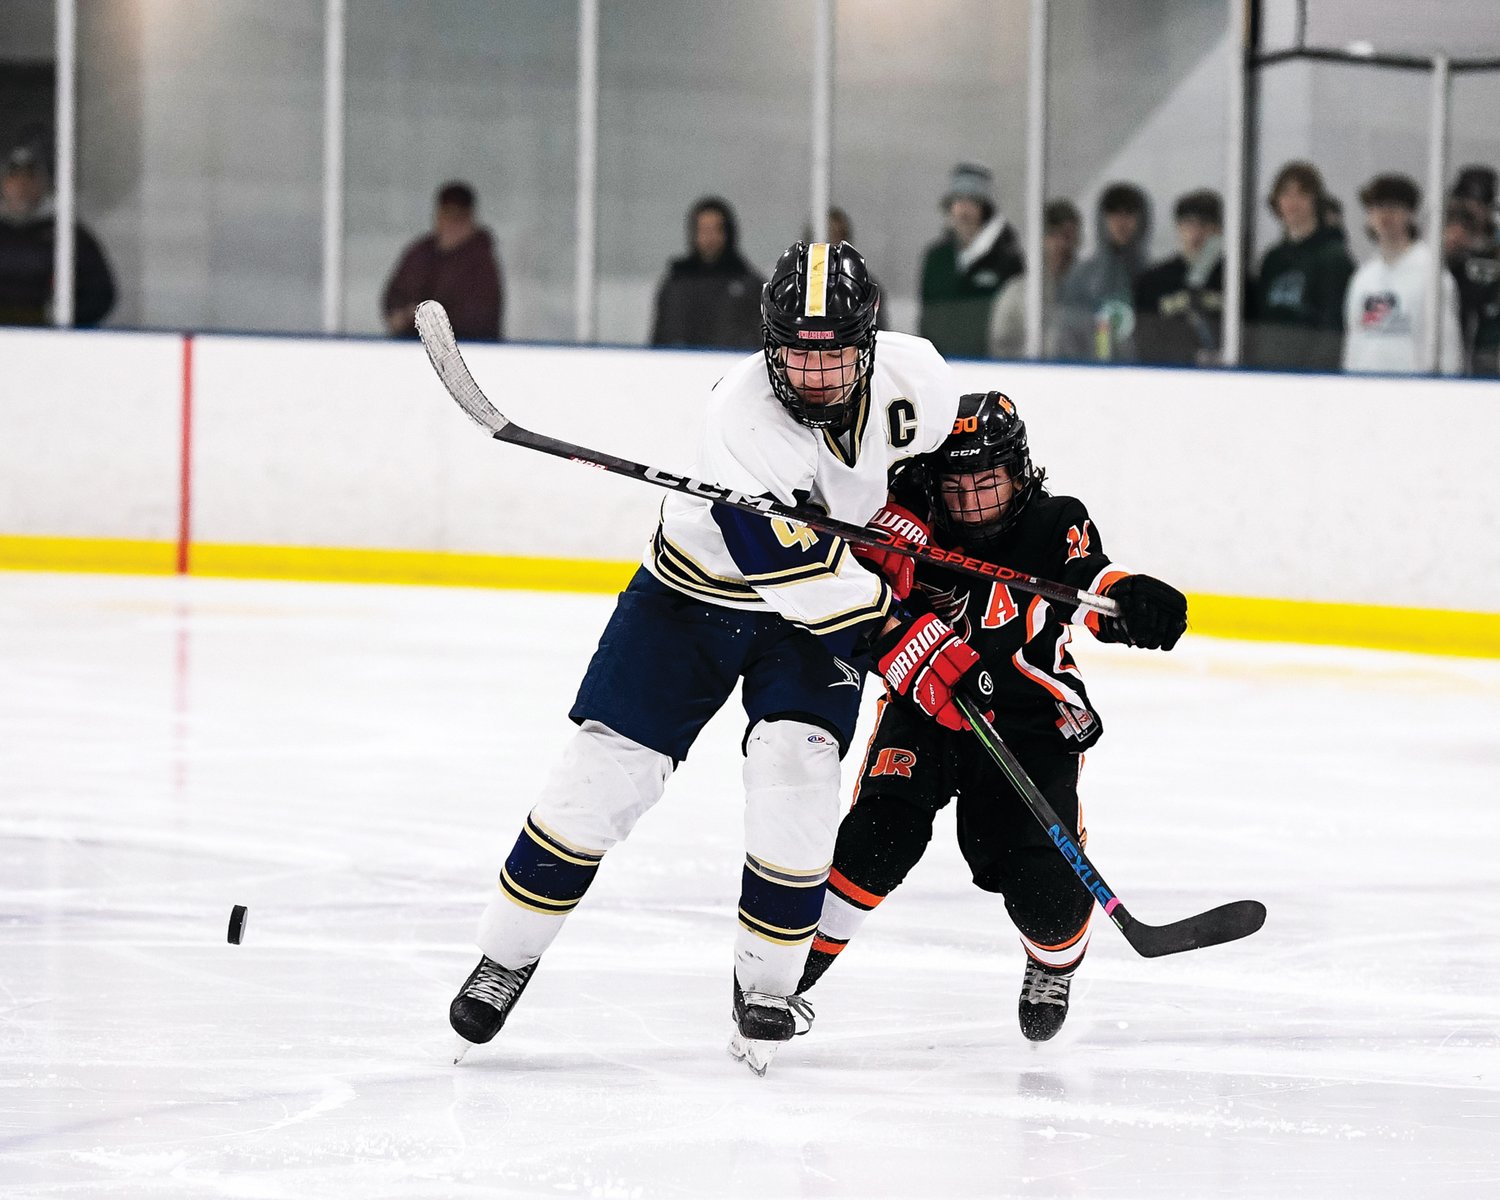 CR South’s Kevin Koles skates past Chris Sarver for the loose puck at center ice.